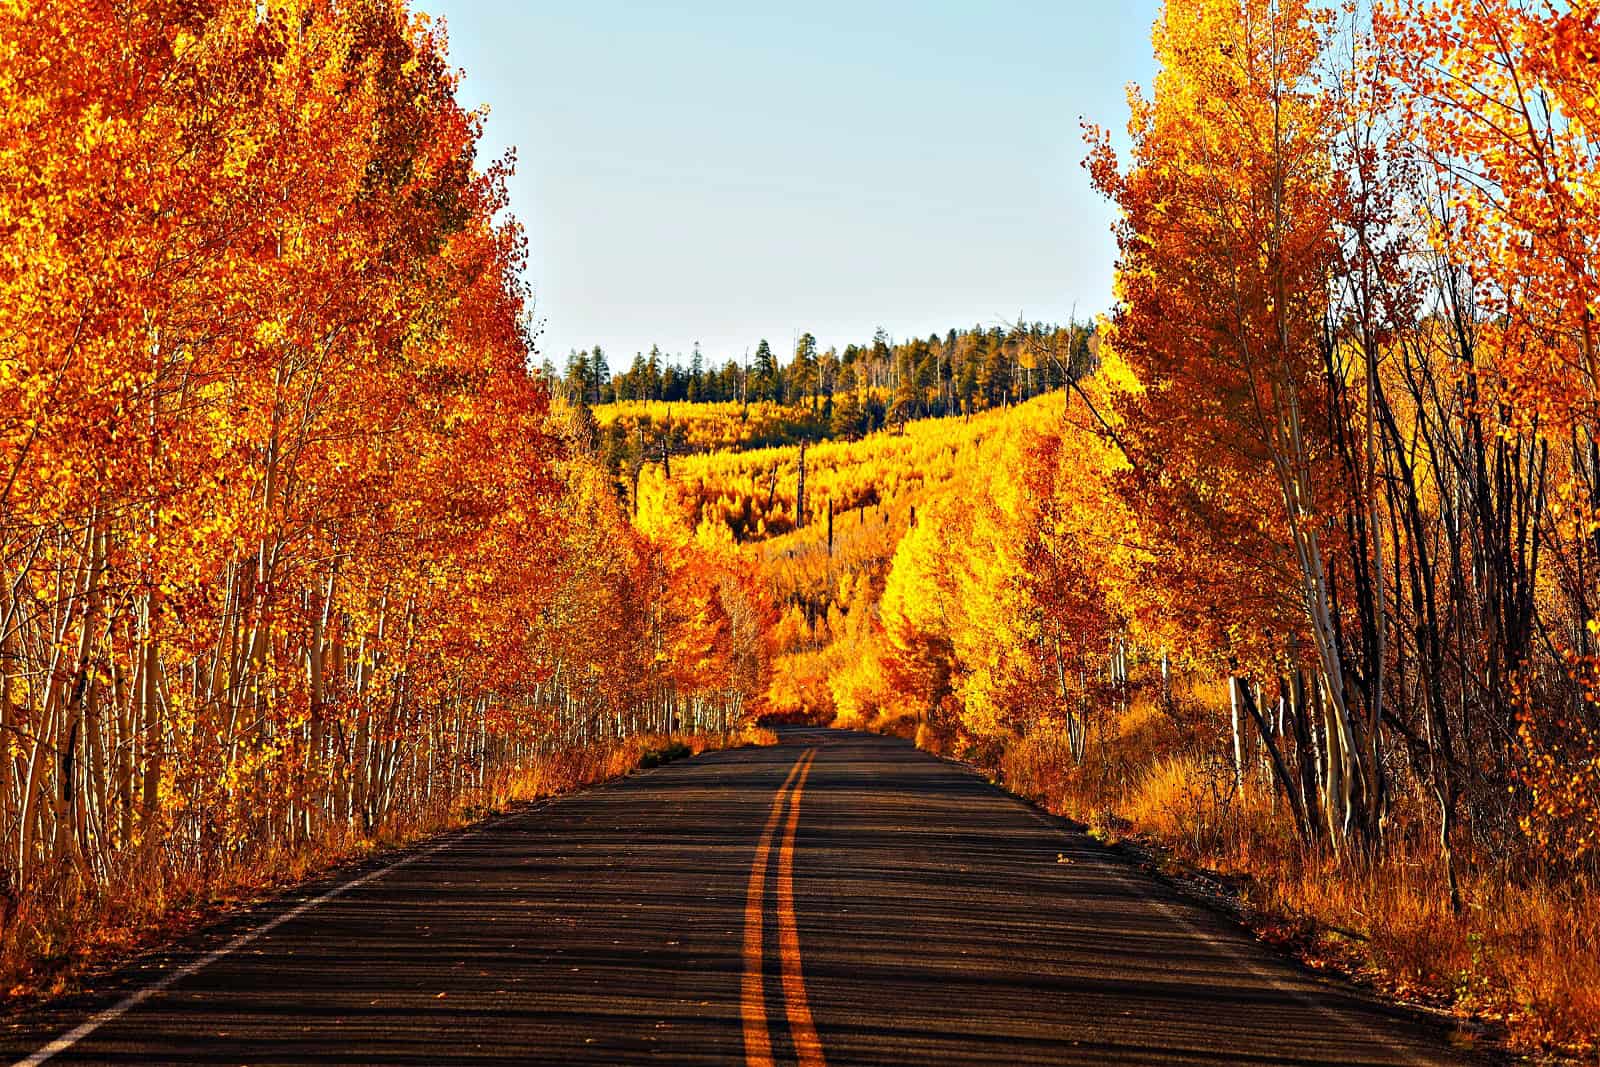 Beautiful fall aspen scene of Cape Royal road winding through a glowing yellow forest on the North Rim of the Grand Canyon